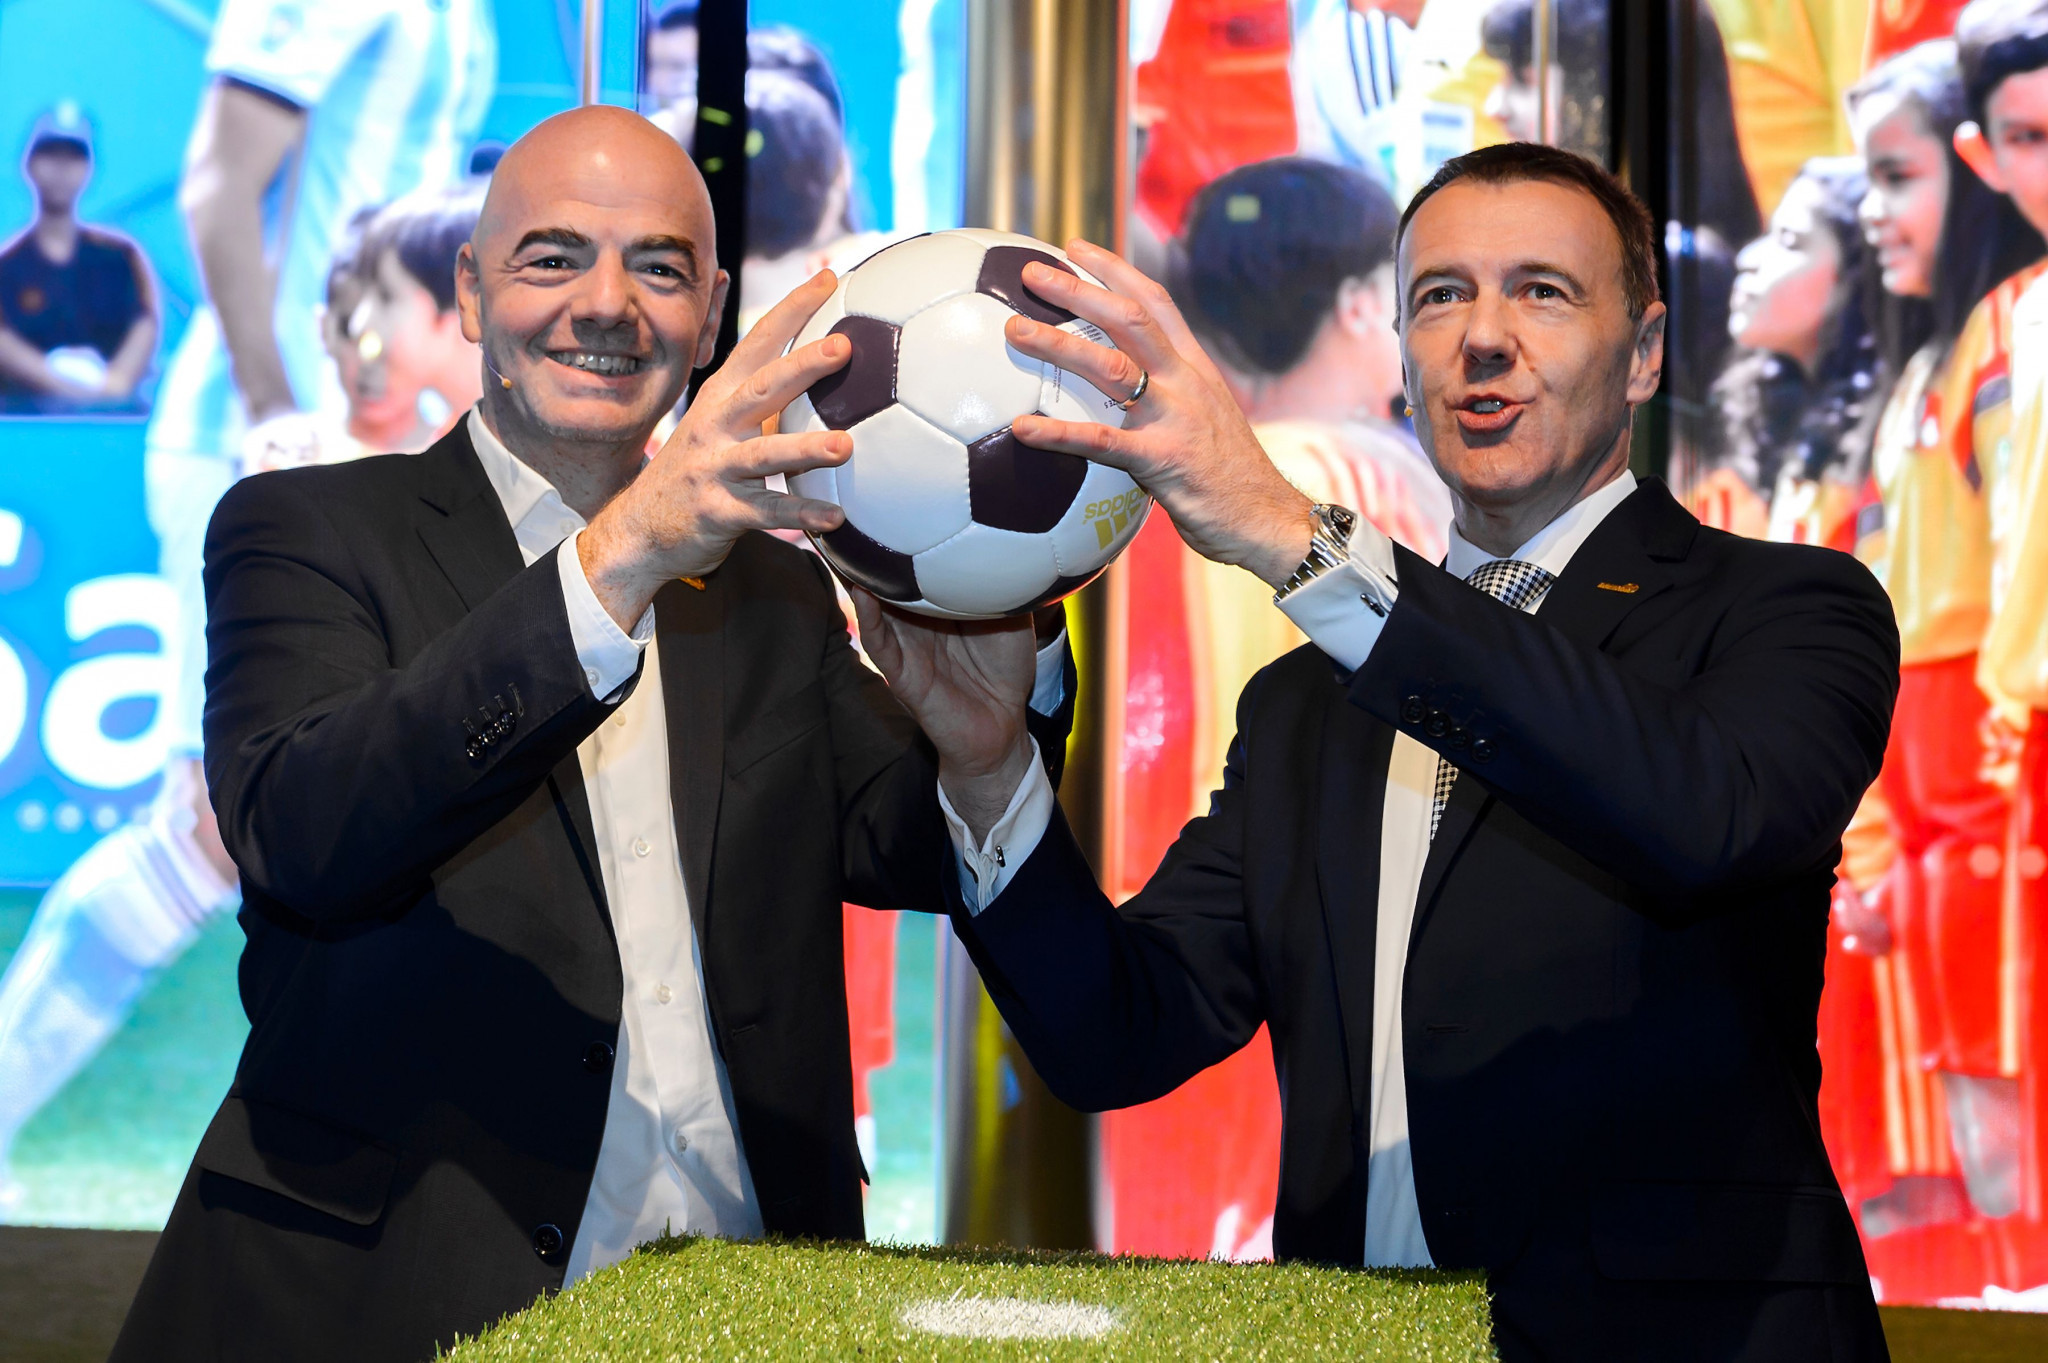 Sepp Blatter's predecessor as FIFA President, Gianni Infantino, left, had opened the Museum in 2016 ©Getty Images